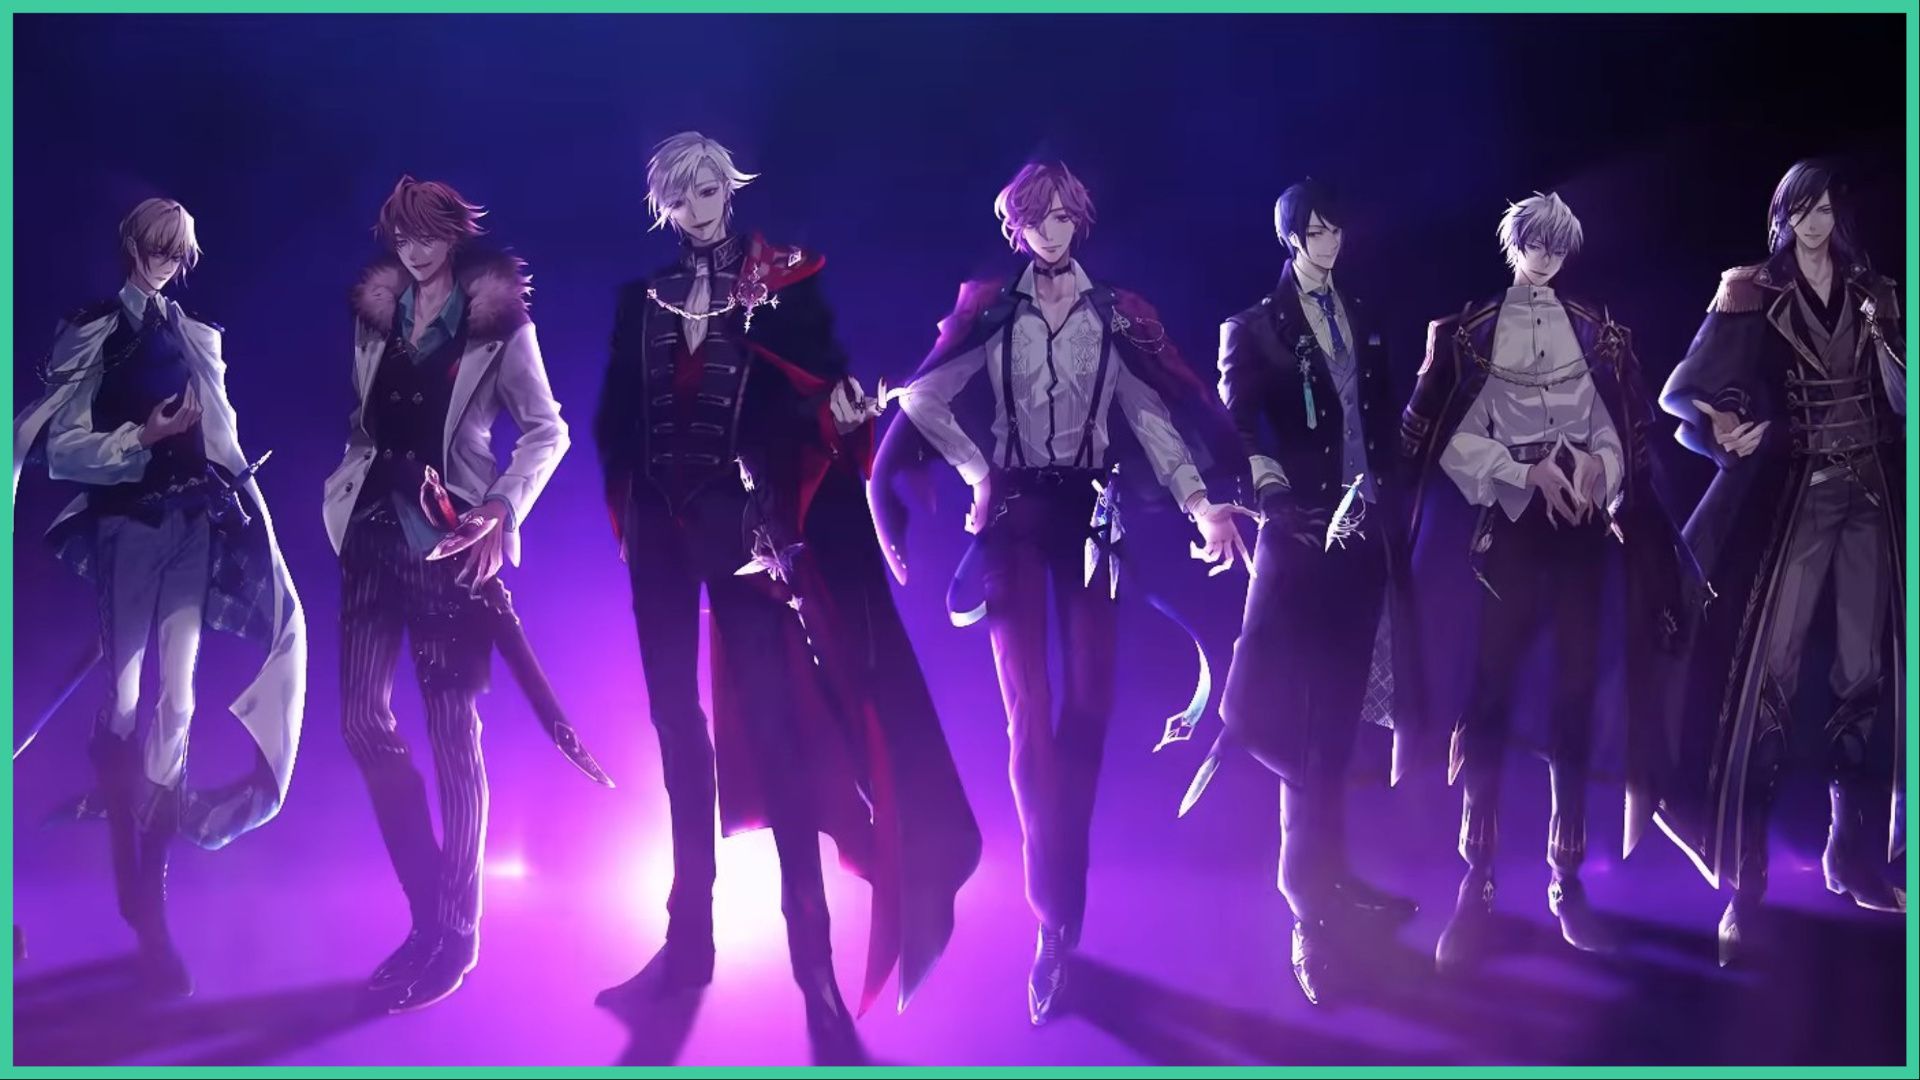 feature image for our ikemen villains escort guide, the image is a screenshot from the game's trailer of a wide shot of 7 of the villains from the game as they all stand together with a bright purple light shining behind them, all of them are wearing gothic-style regal clothing